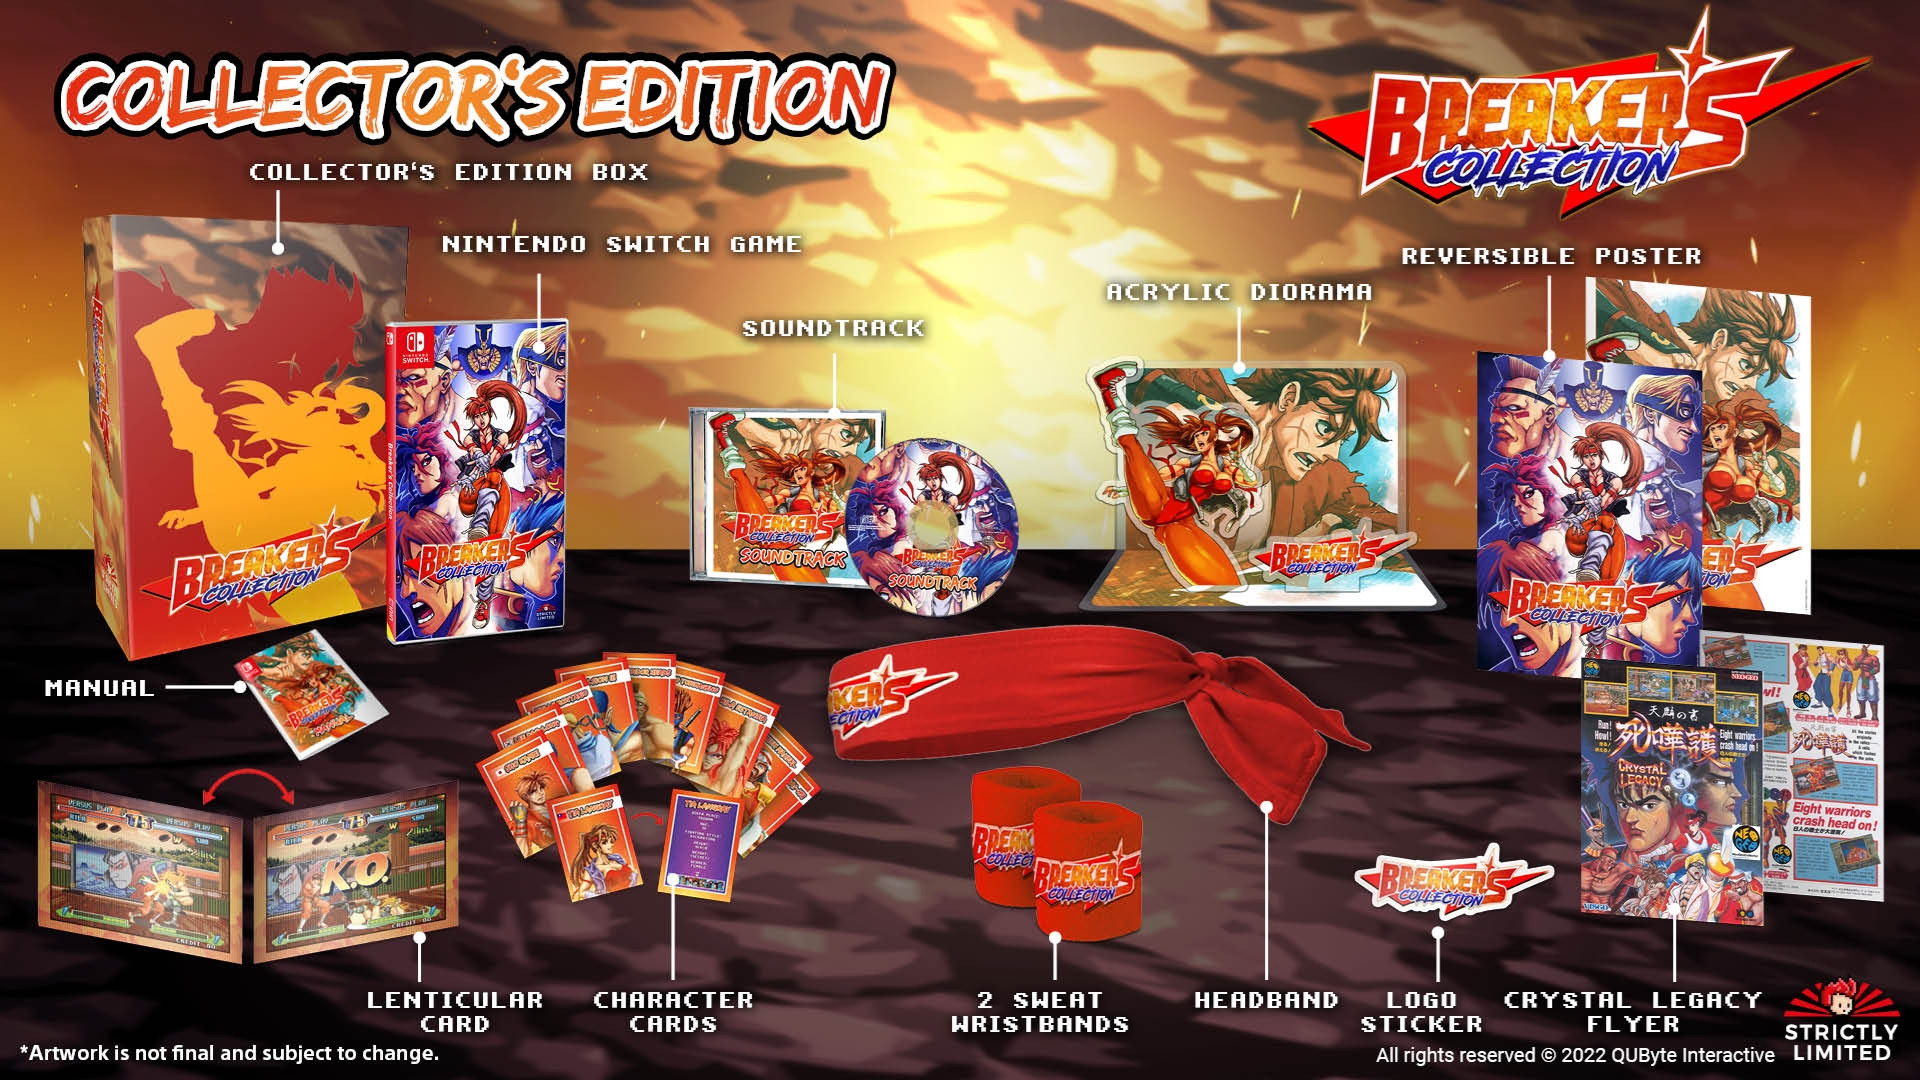 Breaker's Collection Collector's Edition